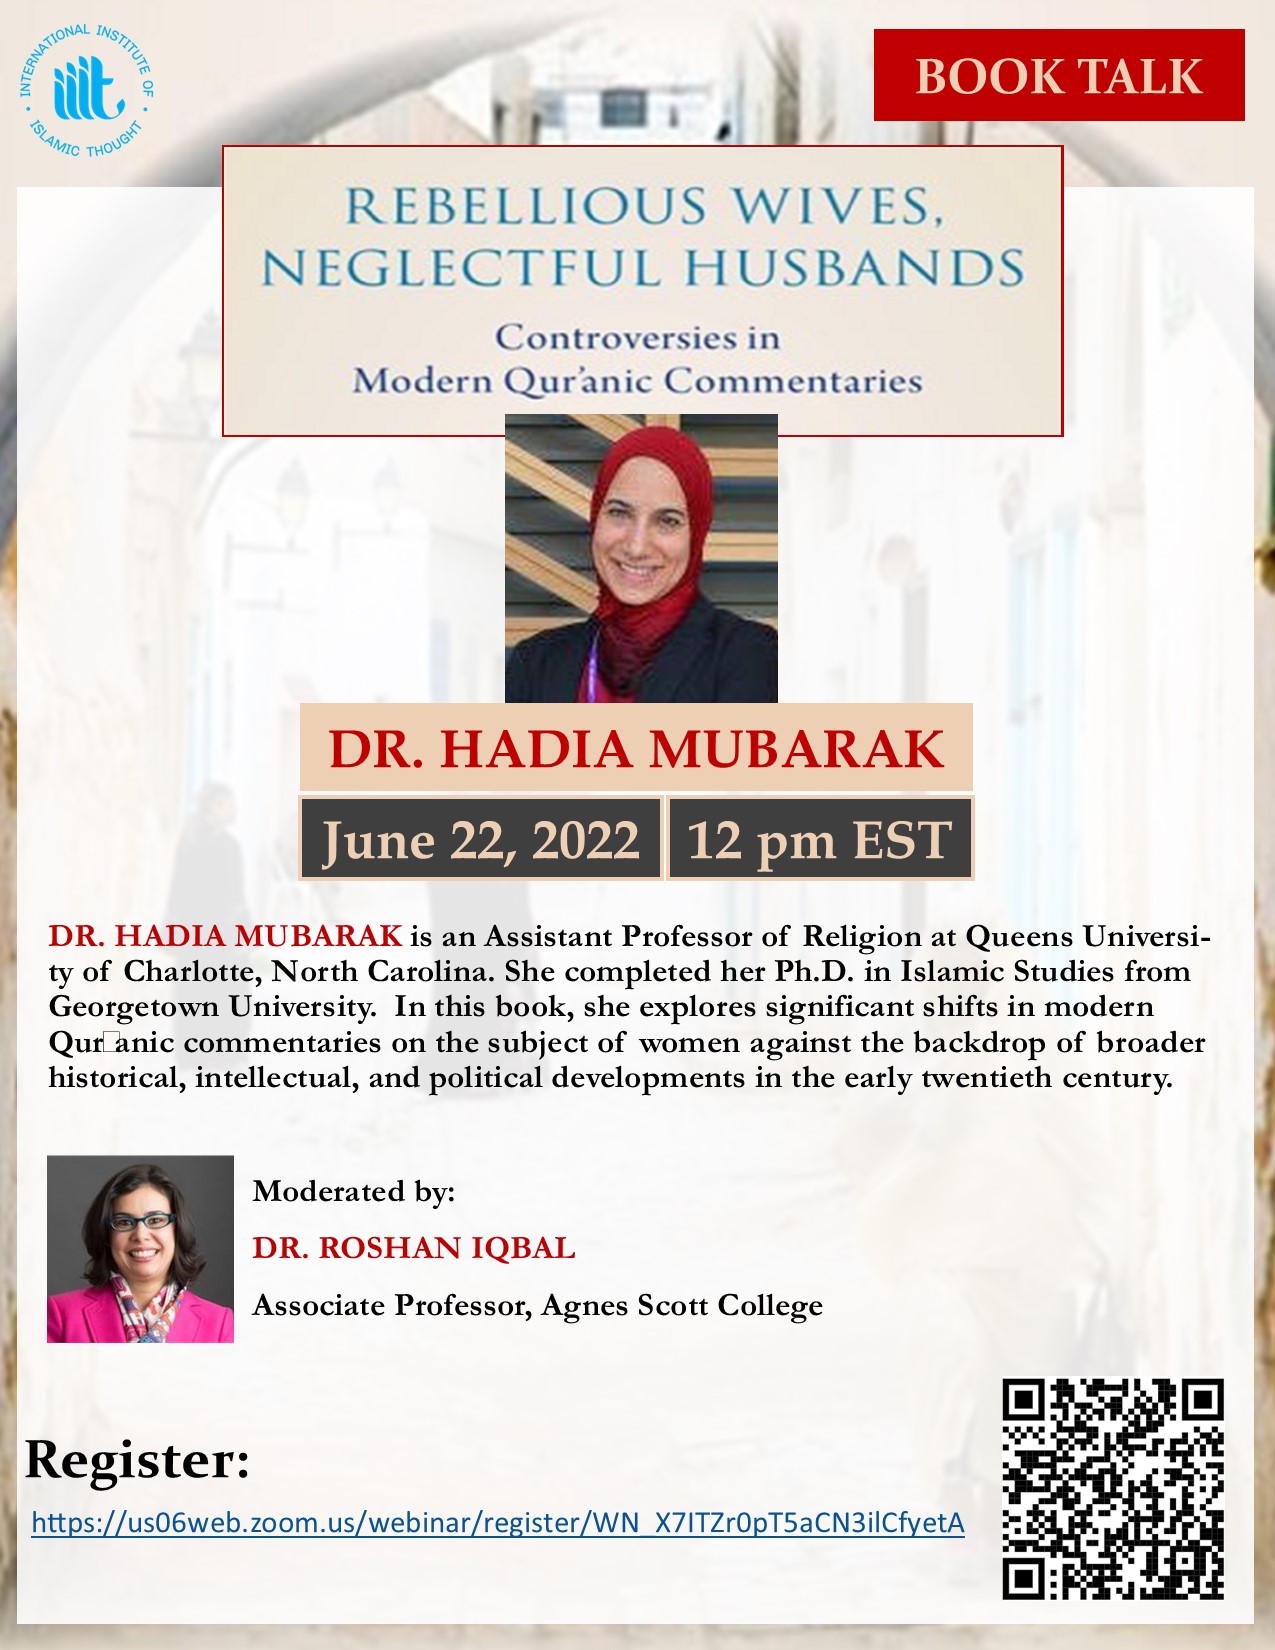 Book Talk: “Rebellious Wives, Neglectful Husbands” By Hadia Mubarak | Moderated By Dr. Roshan Iqbal